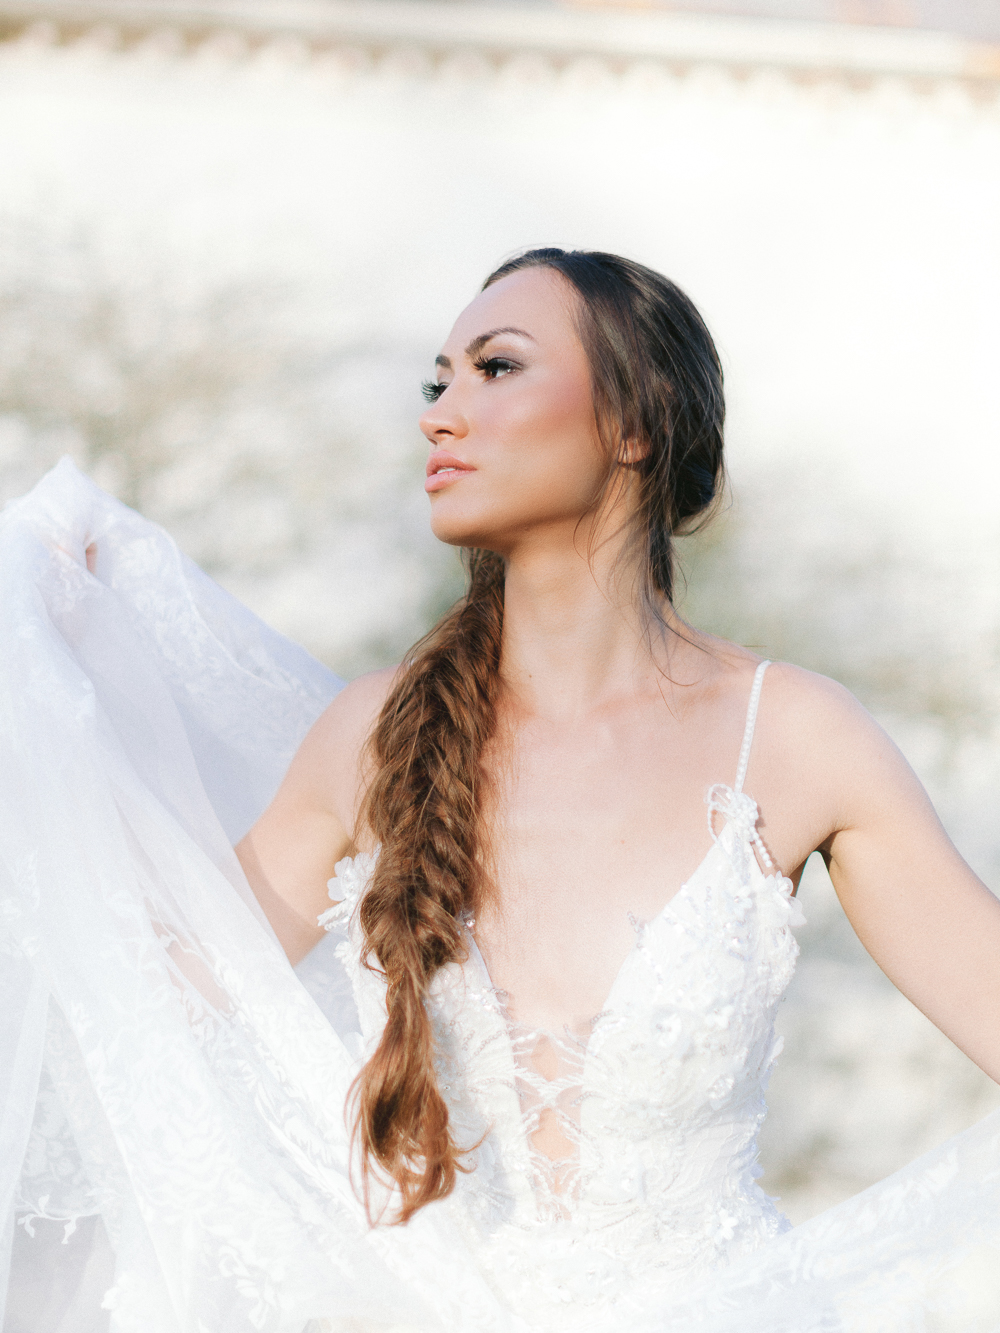 Portrait of oh-so-dreamy wedding dress with delicate lace detail